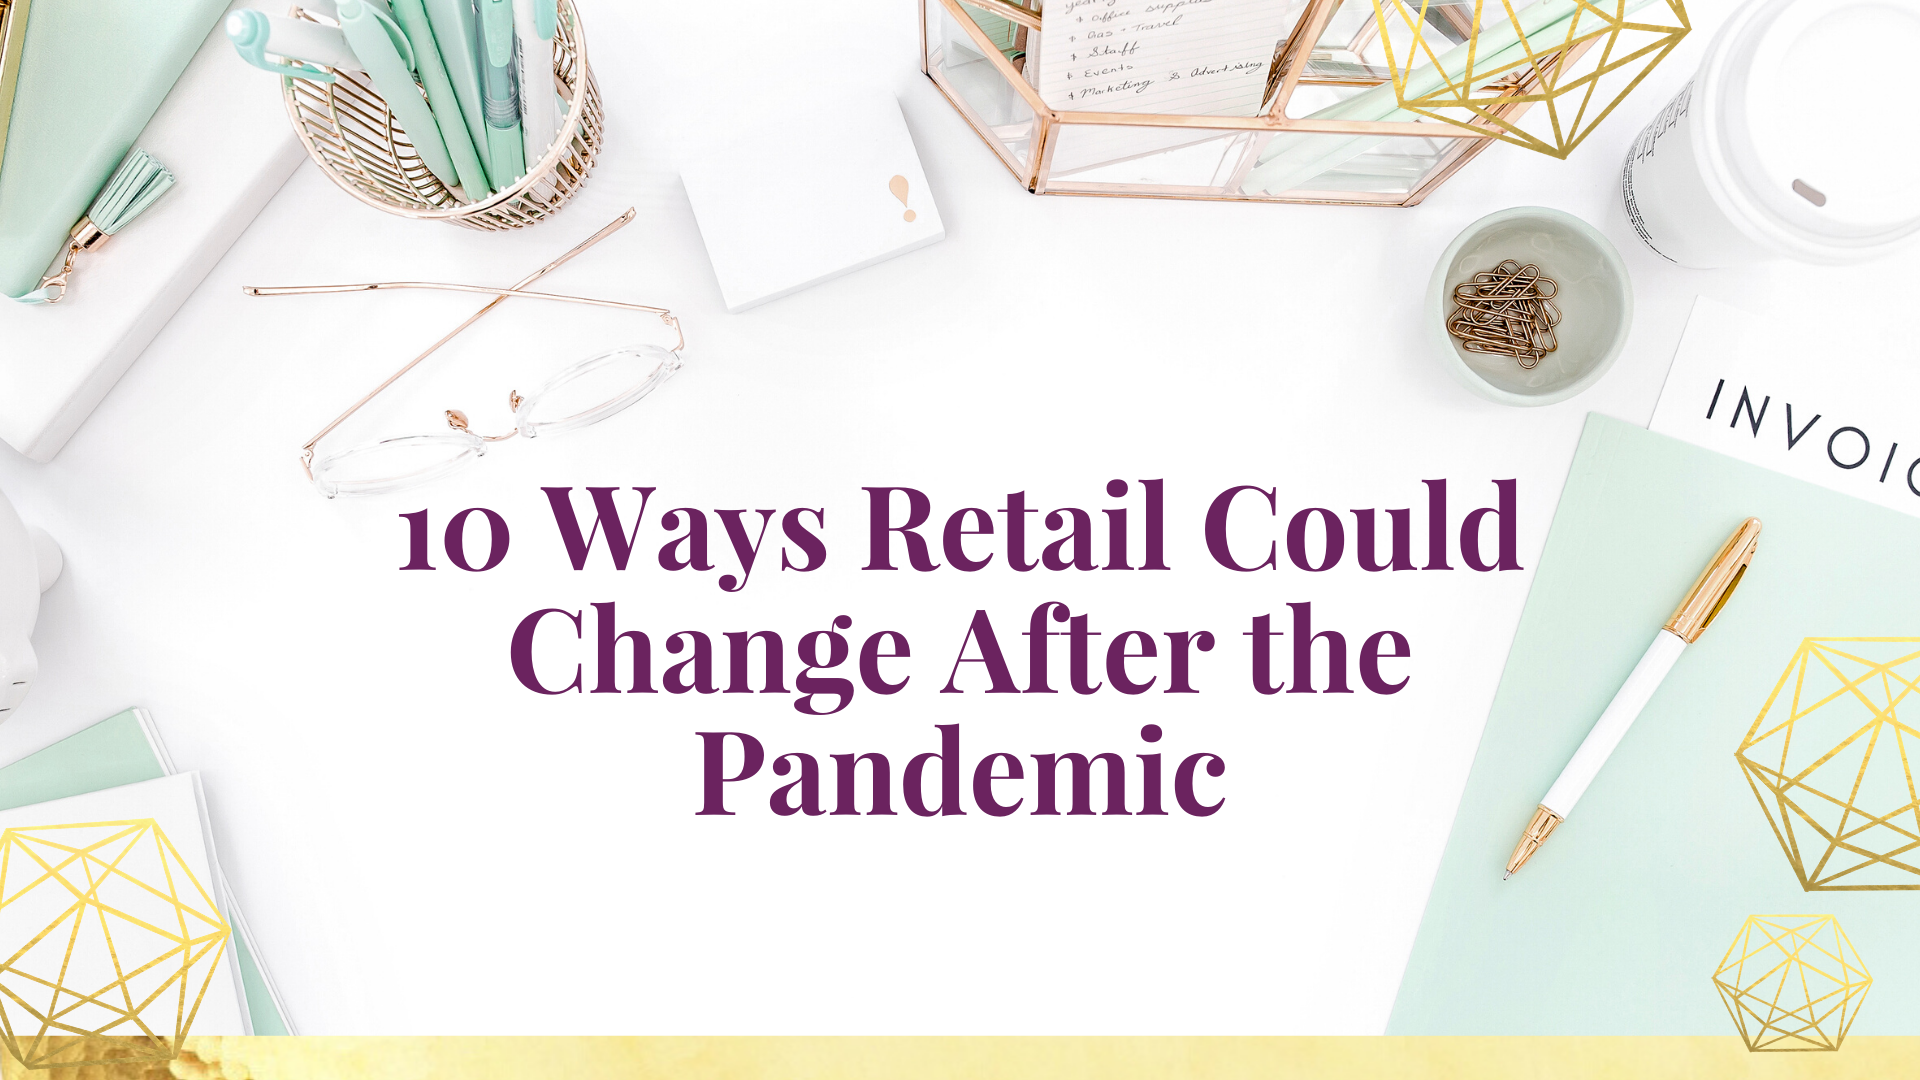 10 Ways Retail Could Change After the Pandemic